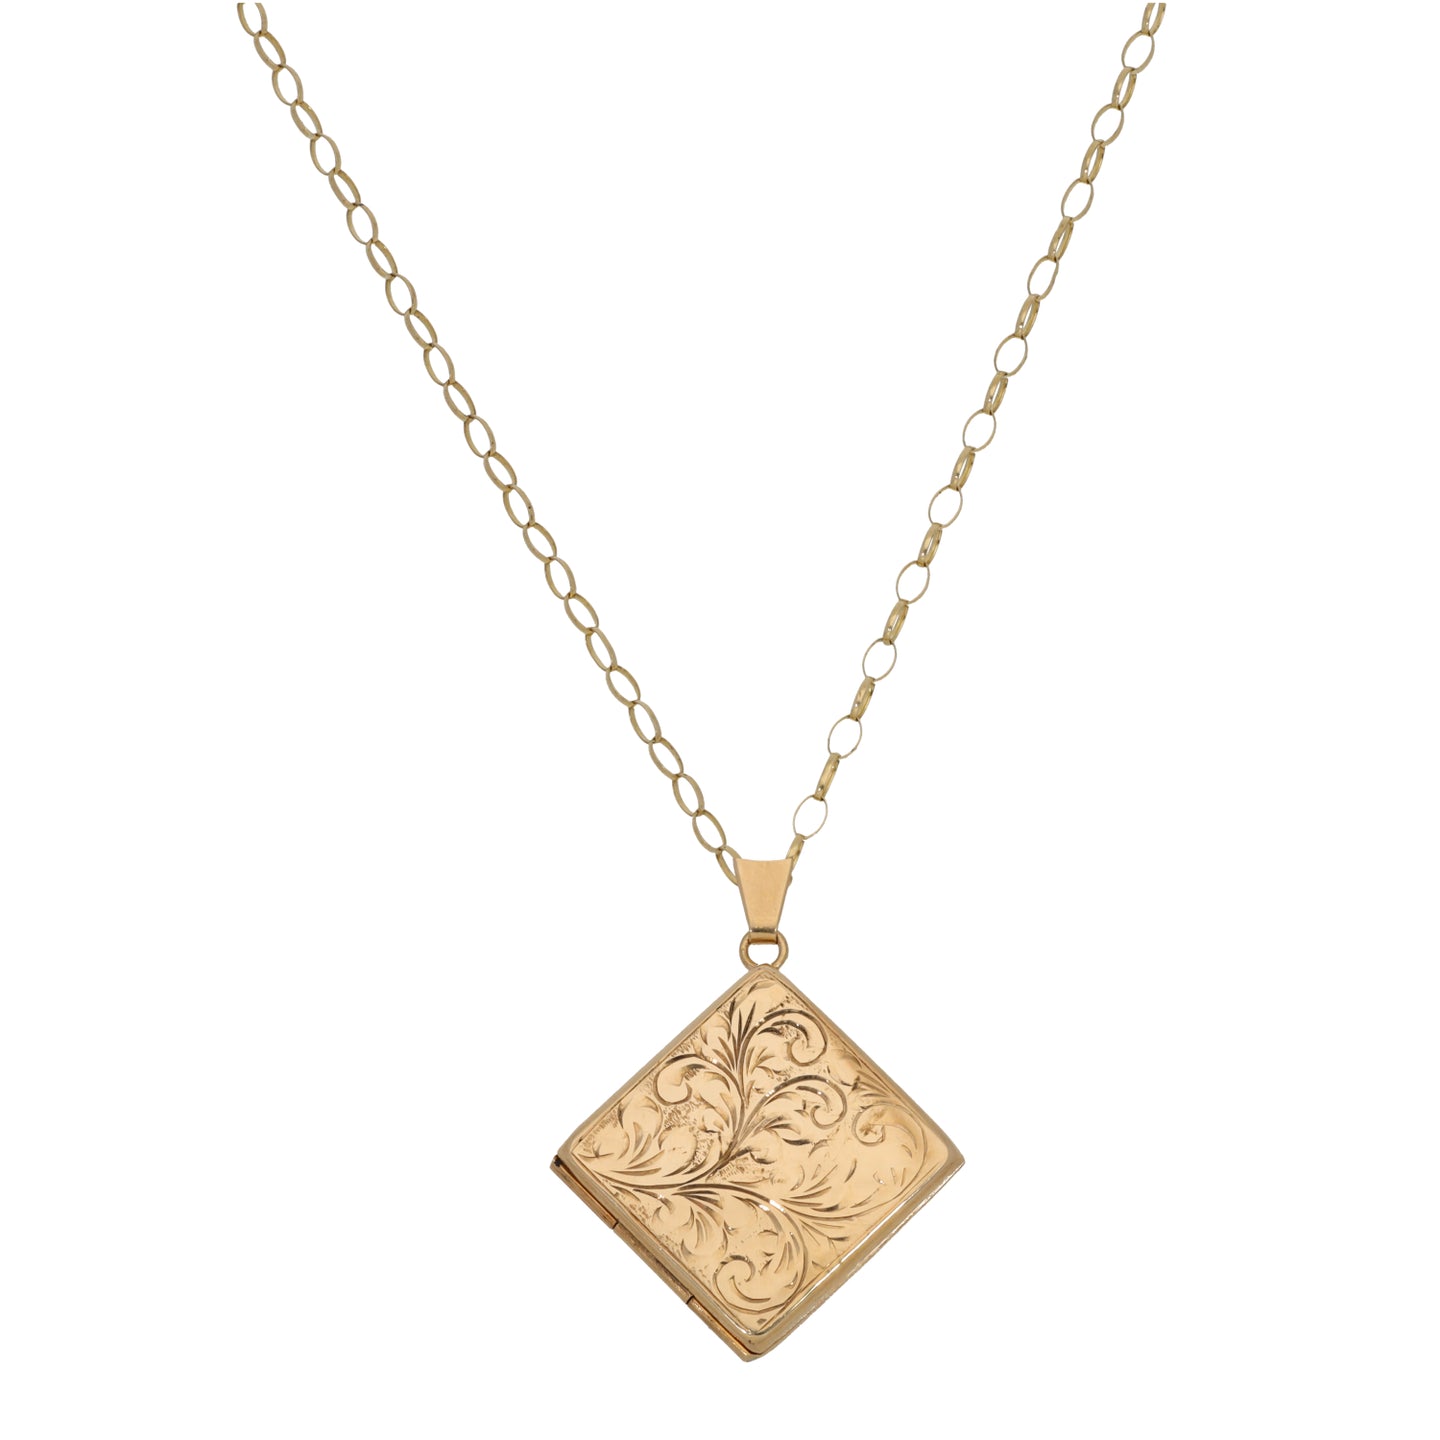 9ct Gold Patterned Locket Pendant With Chain